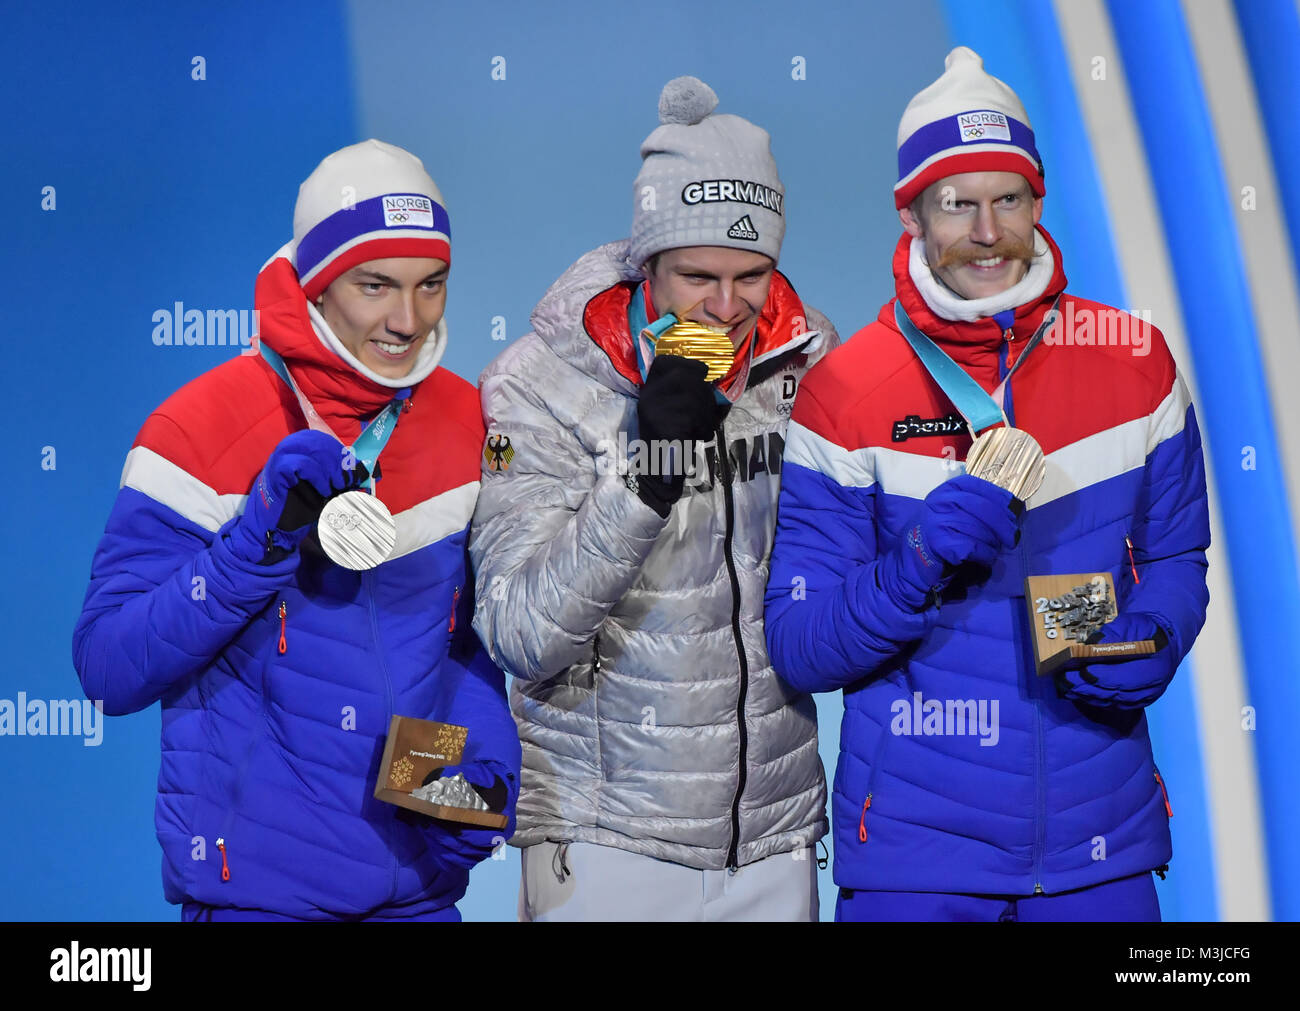 Pyeongchang, South Korea. 11th Feb, 2018. Champion Andreas Wellinger from Germany (C), second-placed Johann Andre Forfang (L) from Norway and third-placed Robert Johansson from Norway pose for photos during the medal ceremony of men's normal hill individual event of ski jumping at 2018 PyeongChang Winter Olympic Games at the Medal Plaza in PyeongChang, South Korea, on Feb. 11, 2018. Credit: Lui Siu Wai/Xinhua/Alamy Live News Stock Photo